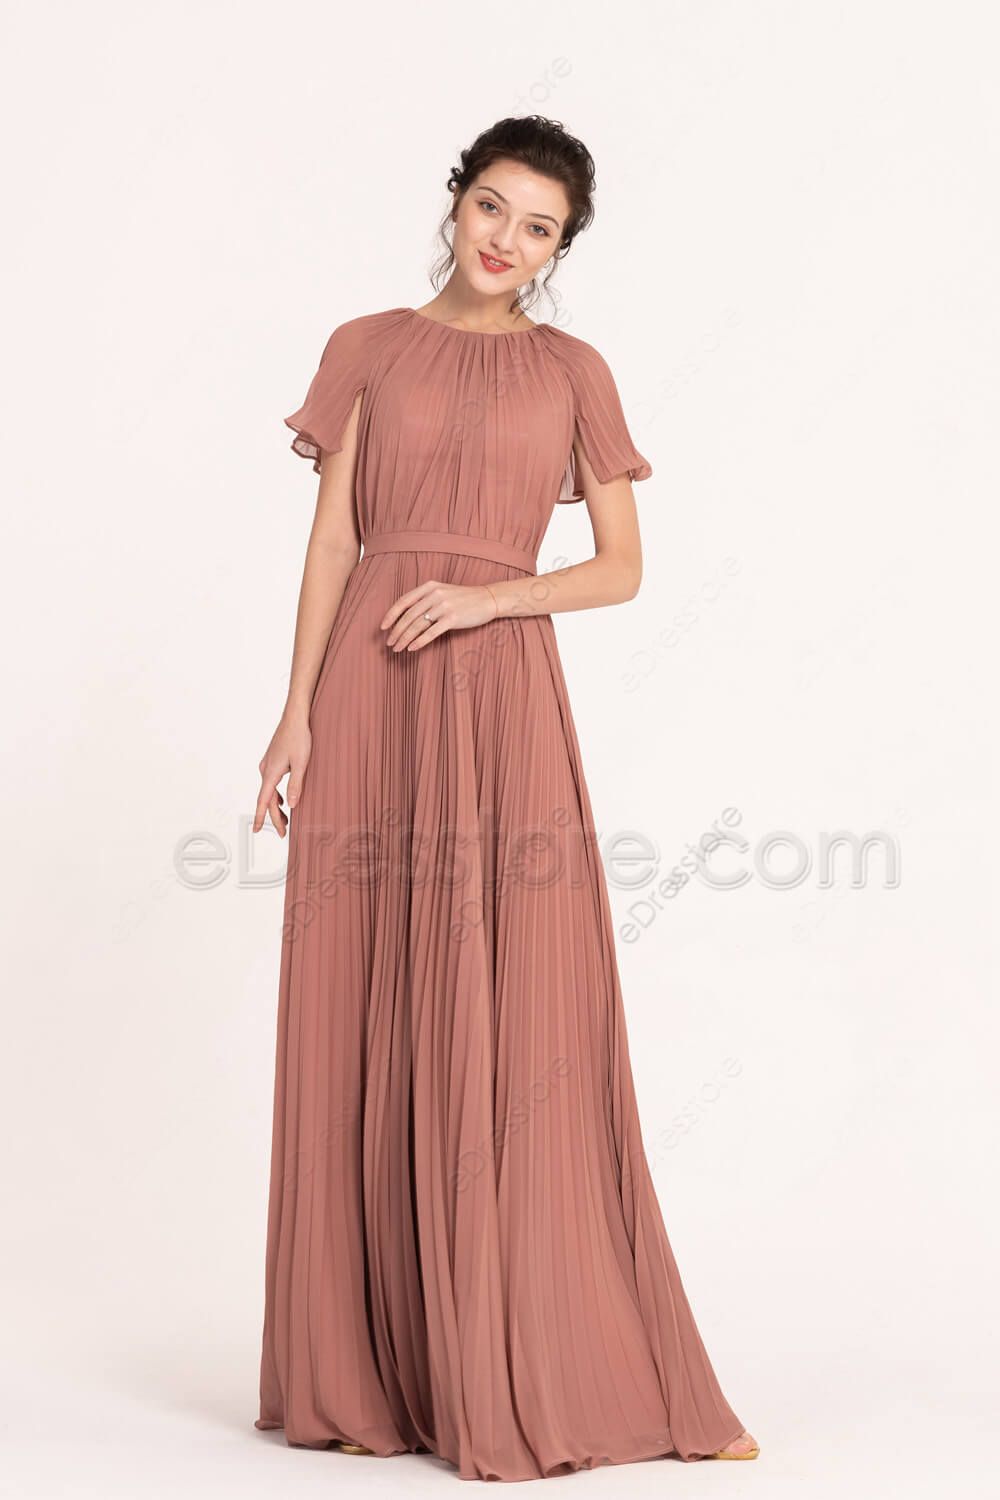 Luxurious Arabic Dusty Rose Gown with Cape - Grrly Grrls